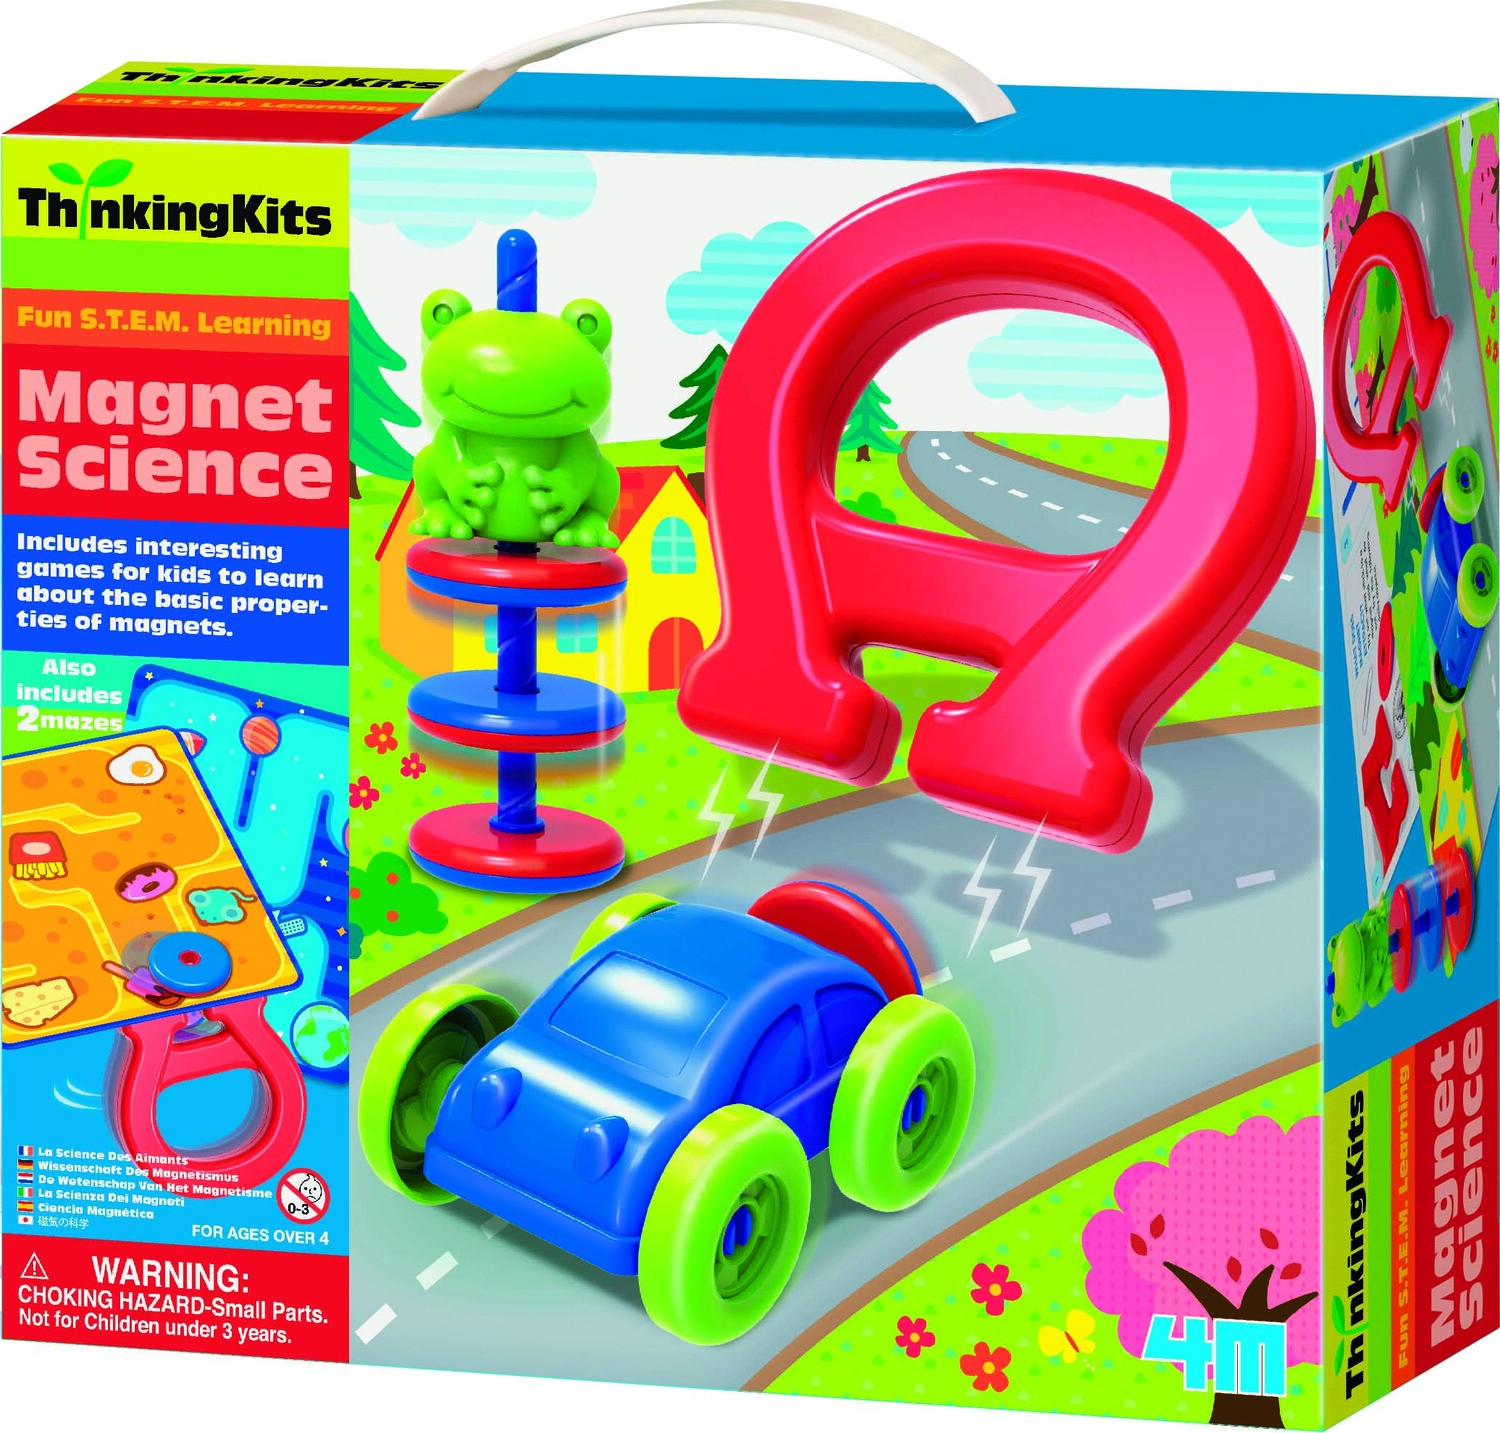 KIDS SCIENCE MAGNETS SET OF 2 COLORFUL EDUCATIONAL TOYS MAGNET FUN 